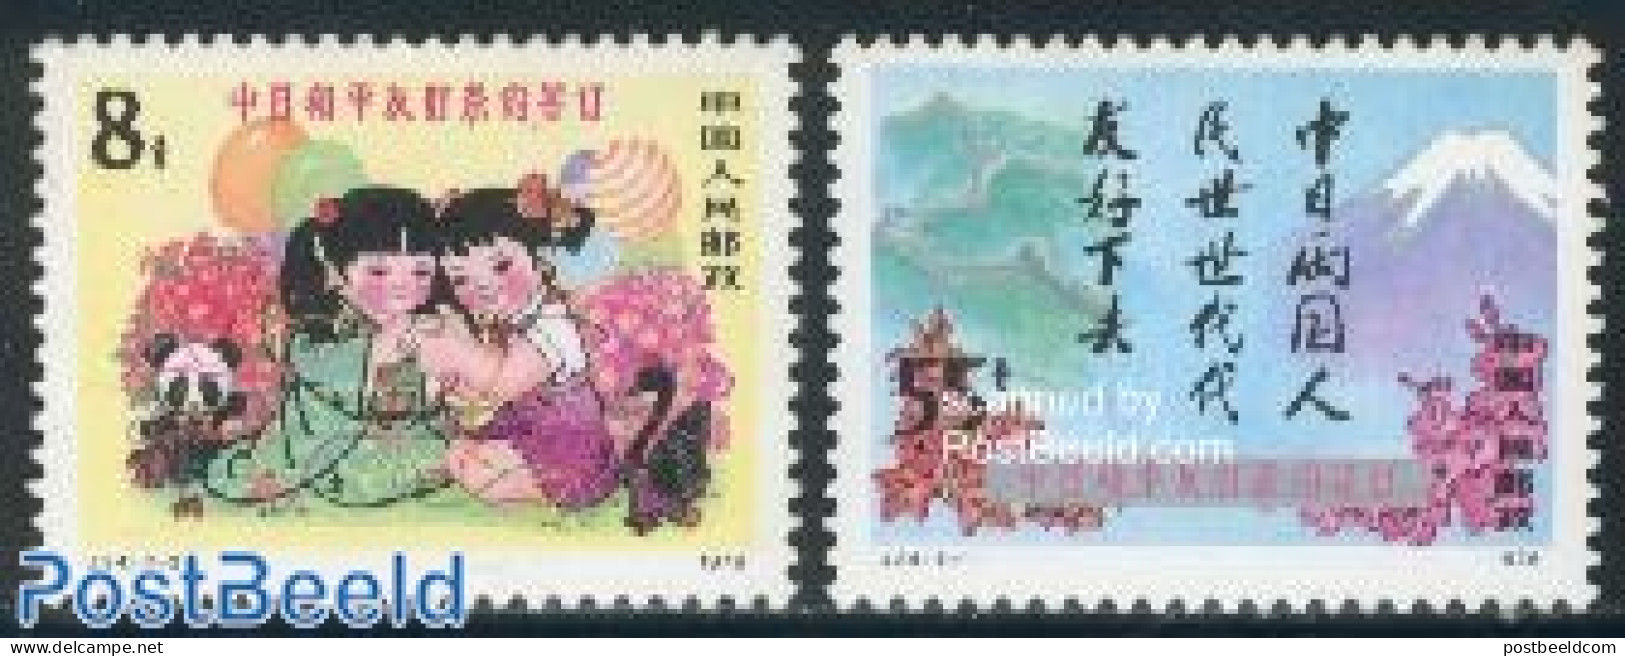 China People’s Republic 1978 Treaty With Japan 2v, Mint NH - Ungebraucht